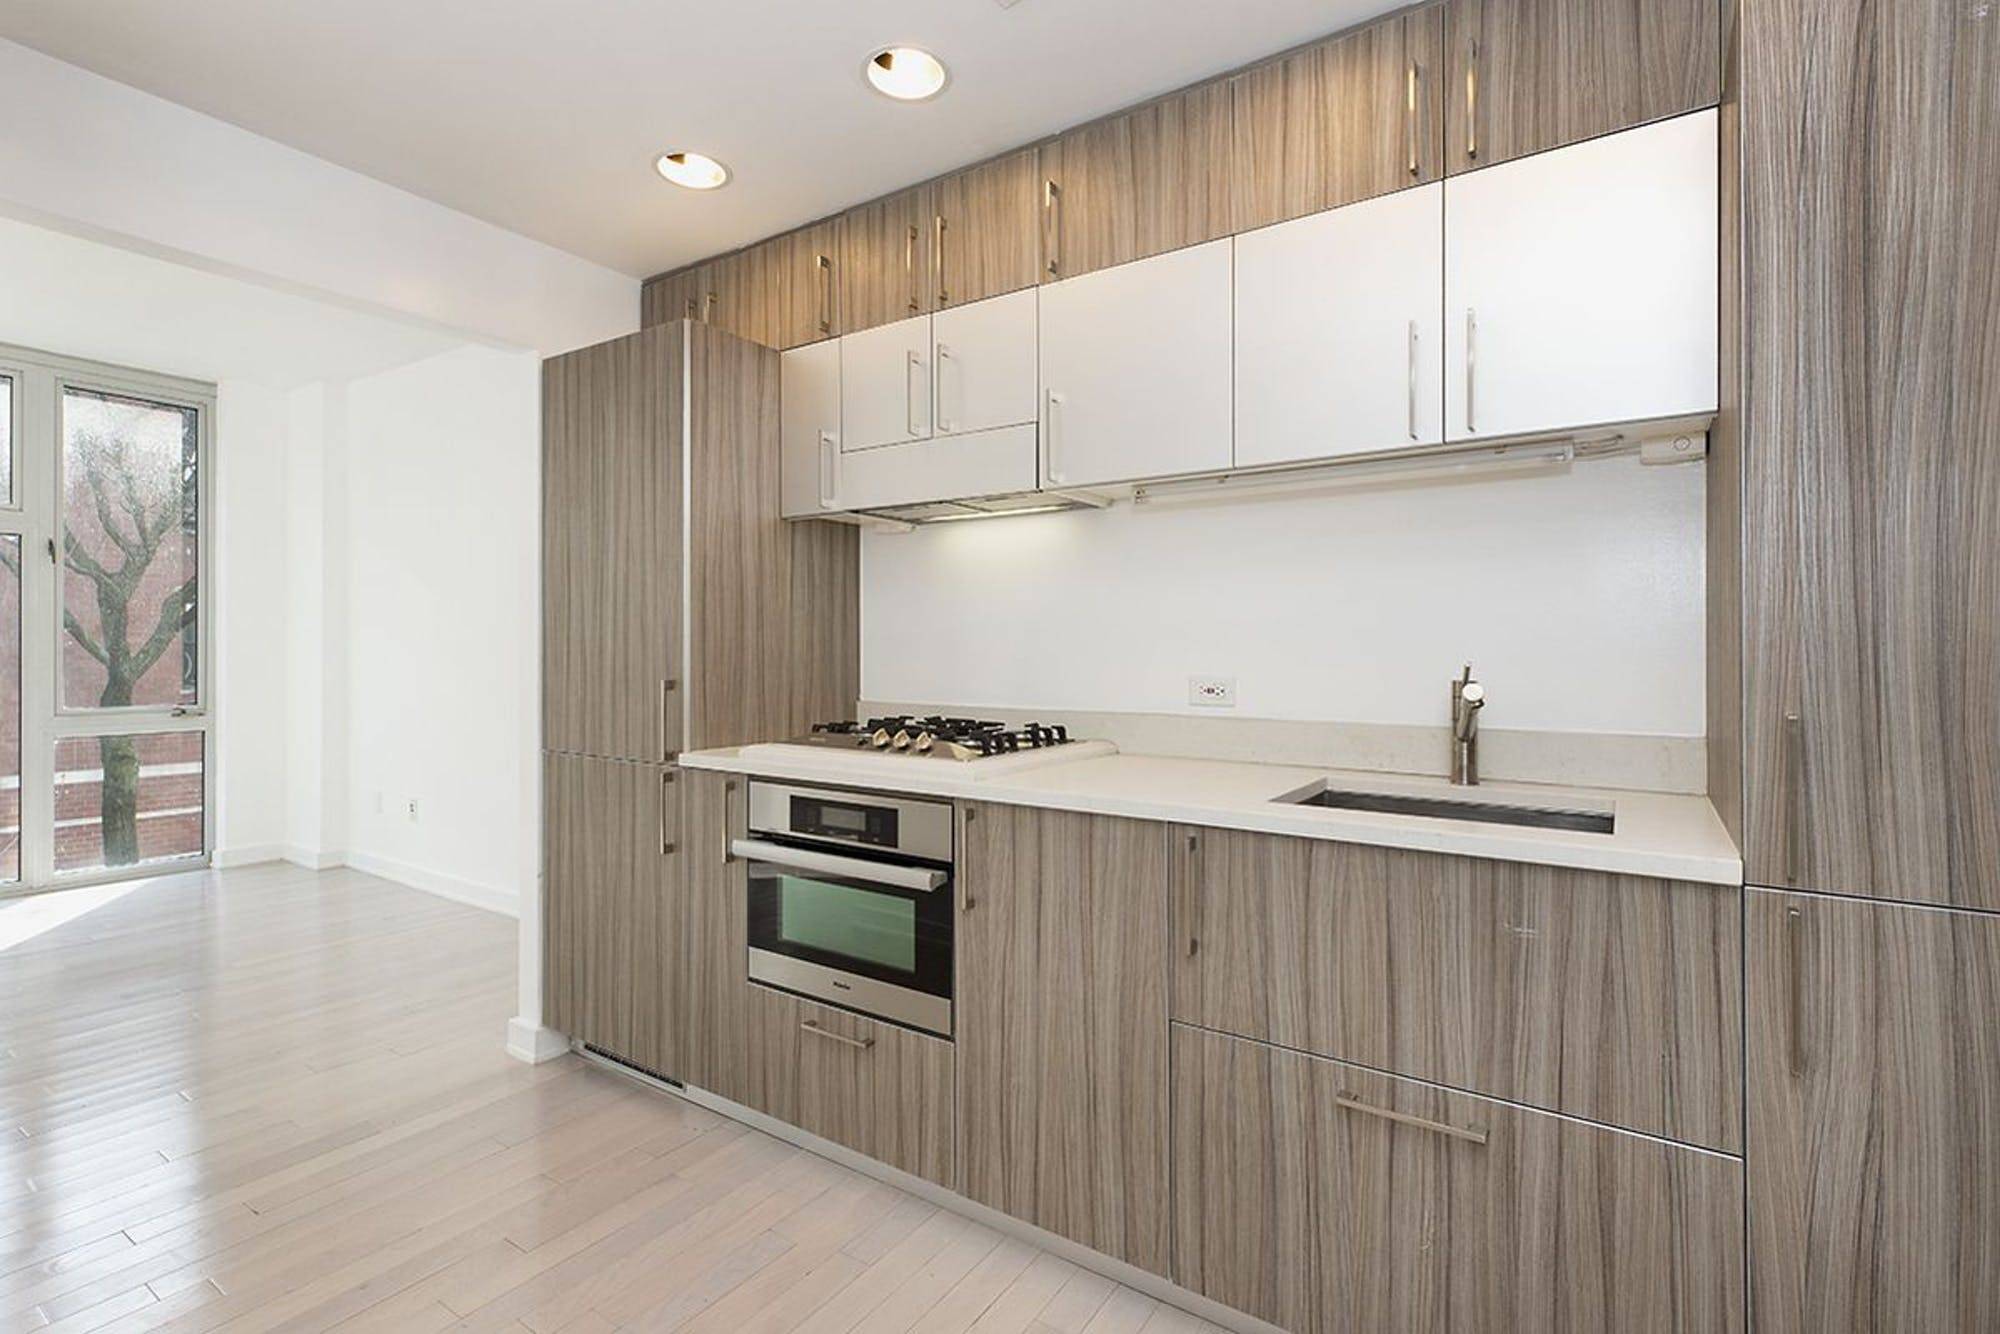 No Brokers Fee Truly in heart of Williamsburg, Brooklyn Williamsburg Social offers luxury living at its best.